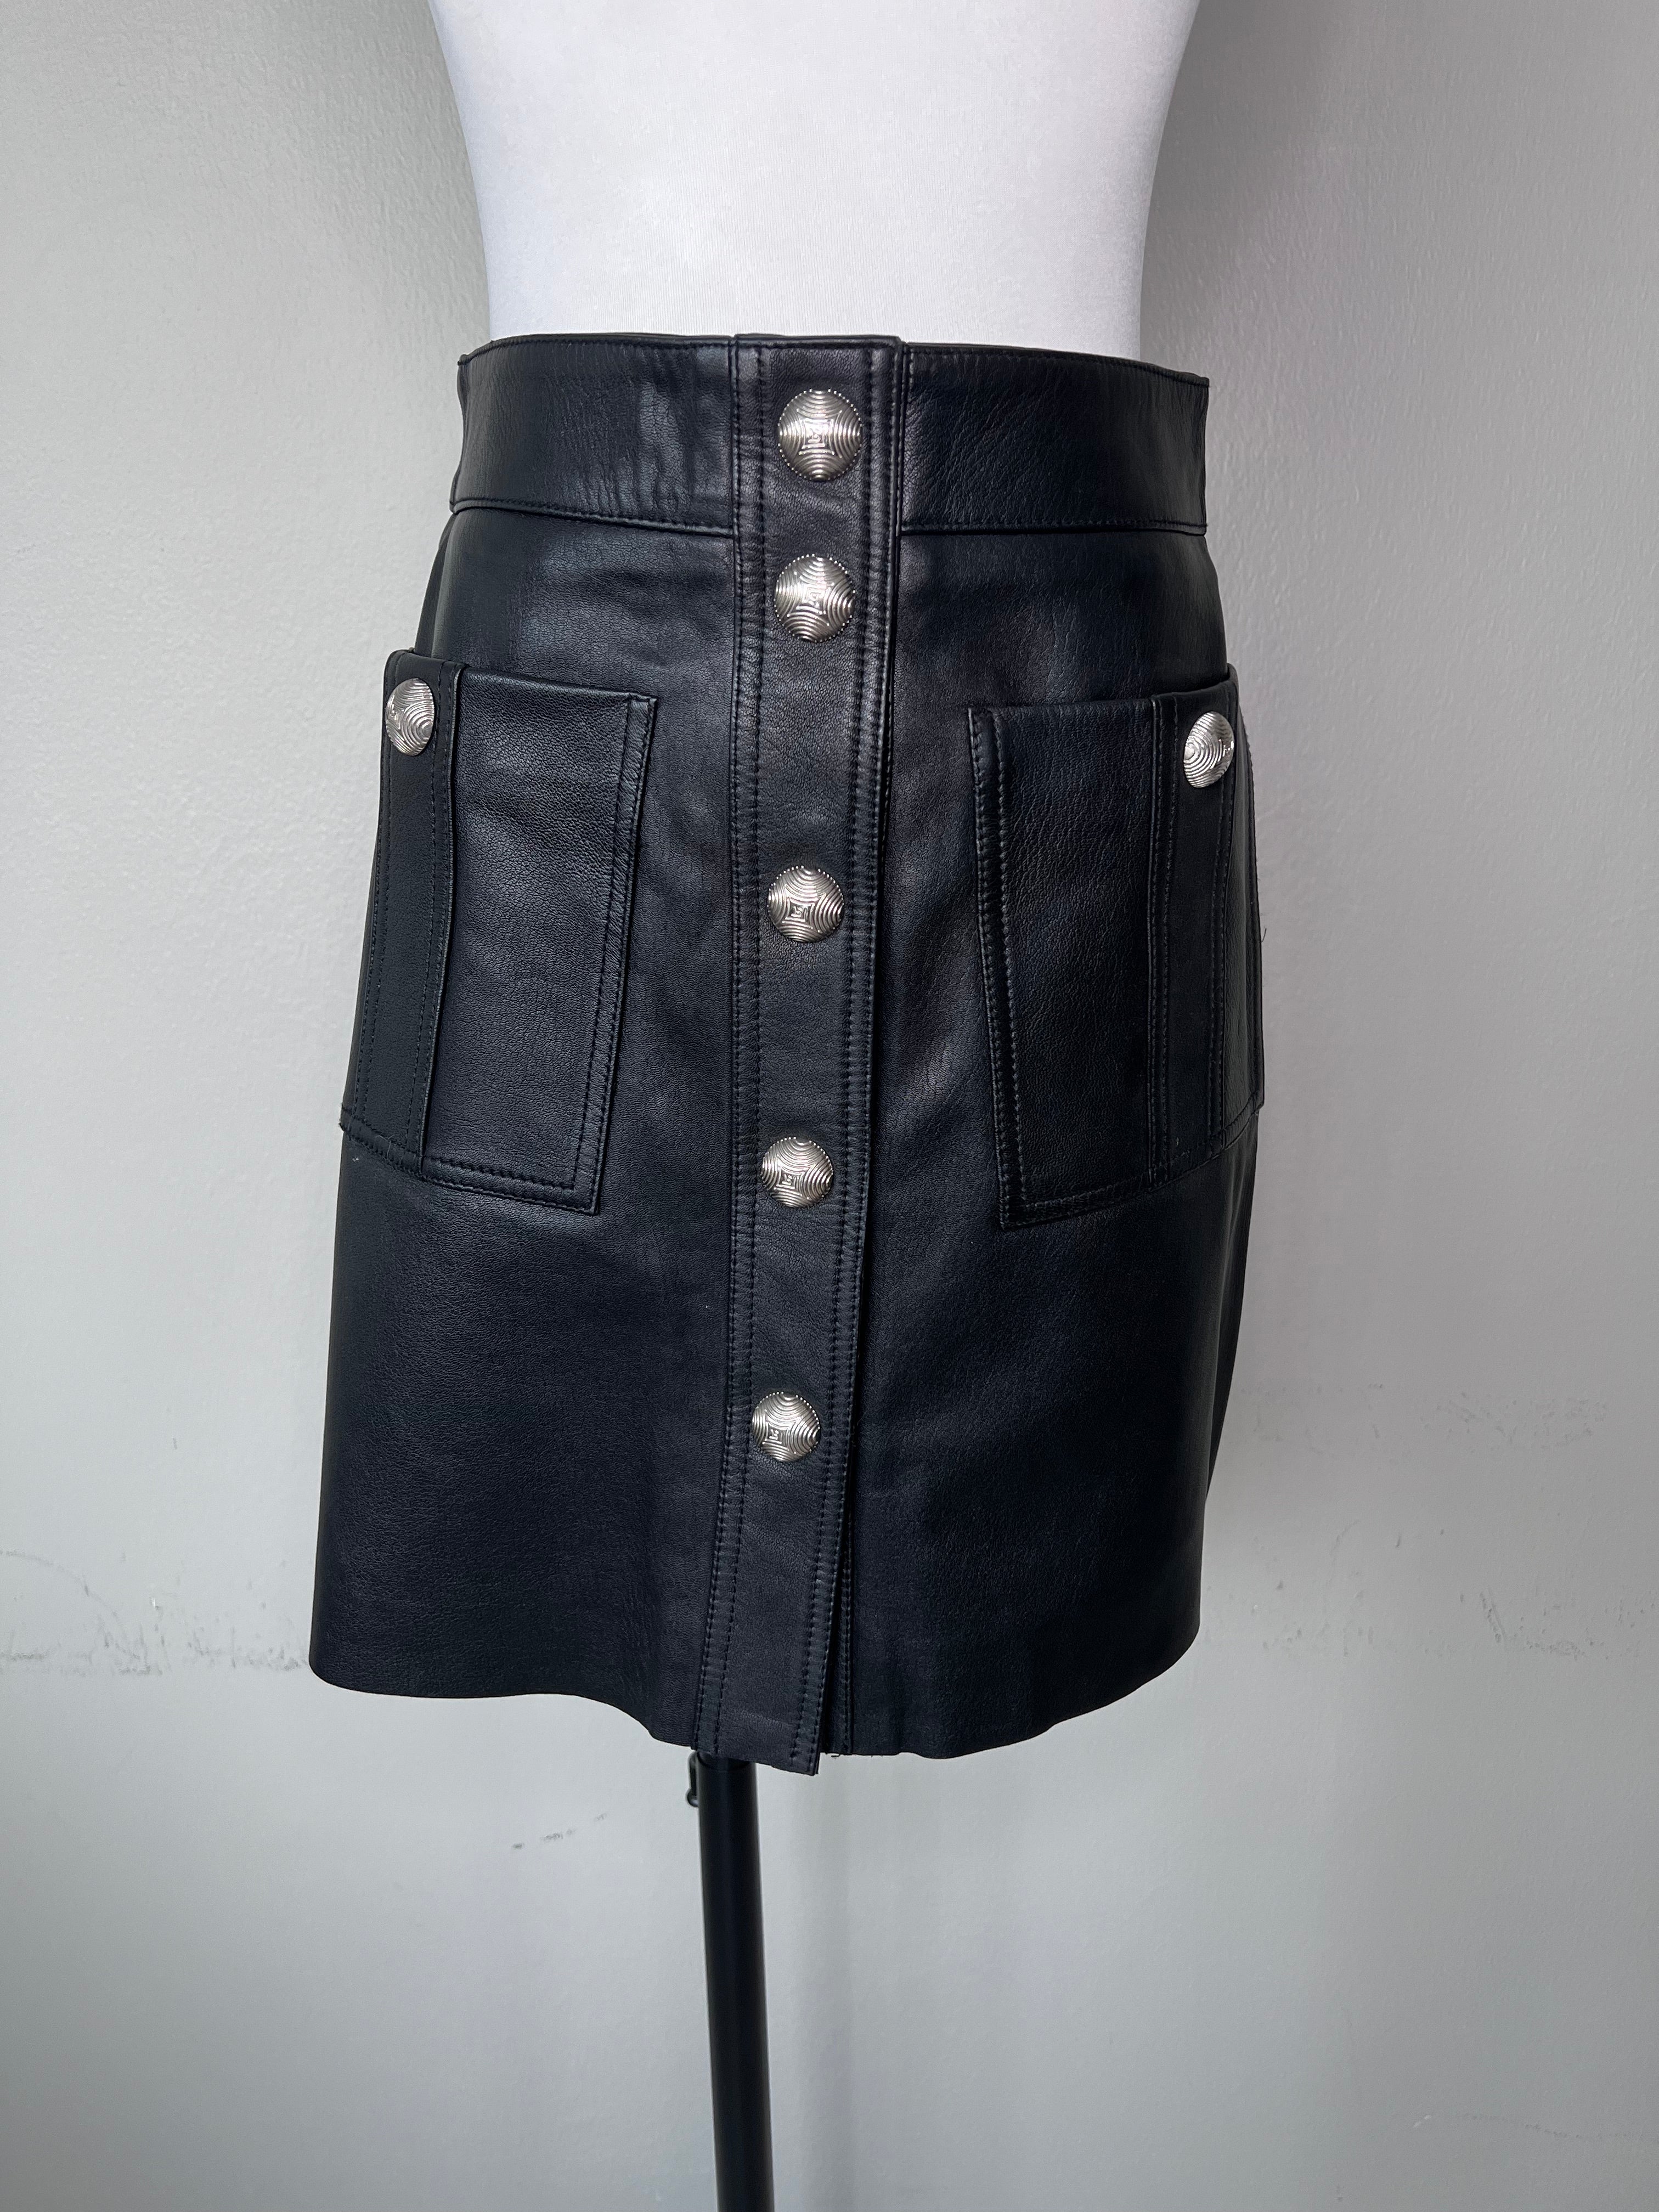 Black leather grunge style mini a-line skirt with pockets, and big silver buttons all the way down.l - MAJE